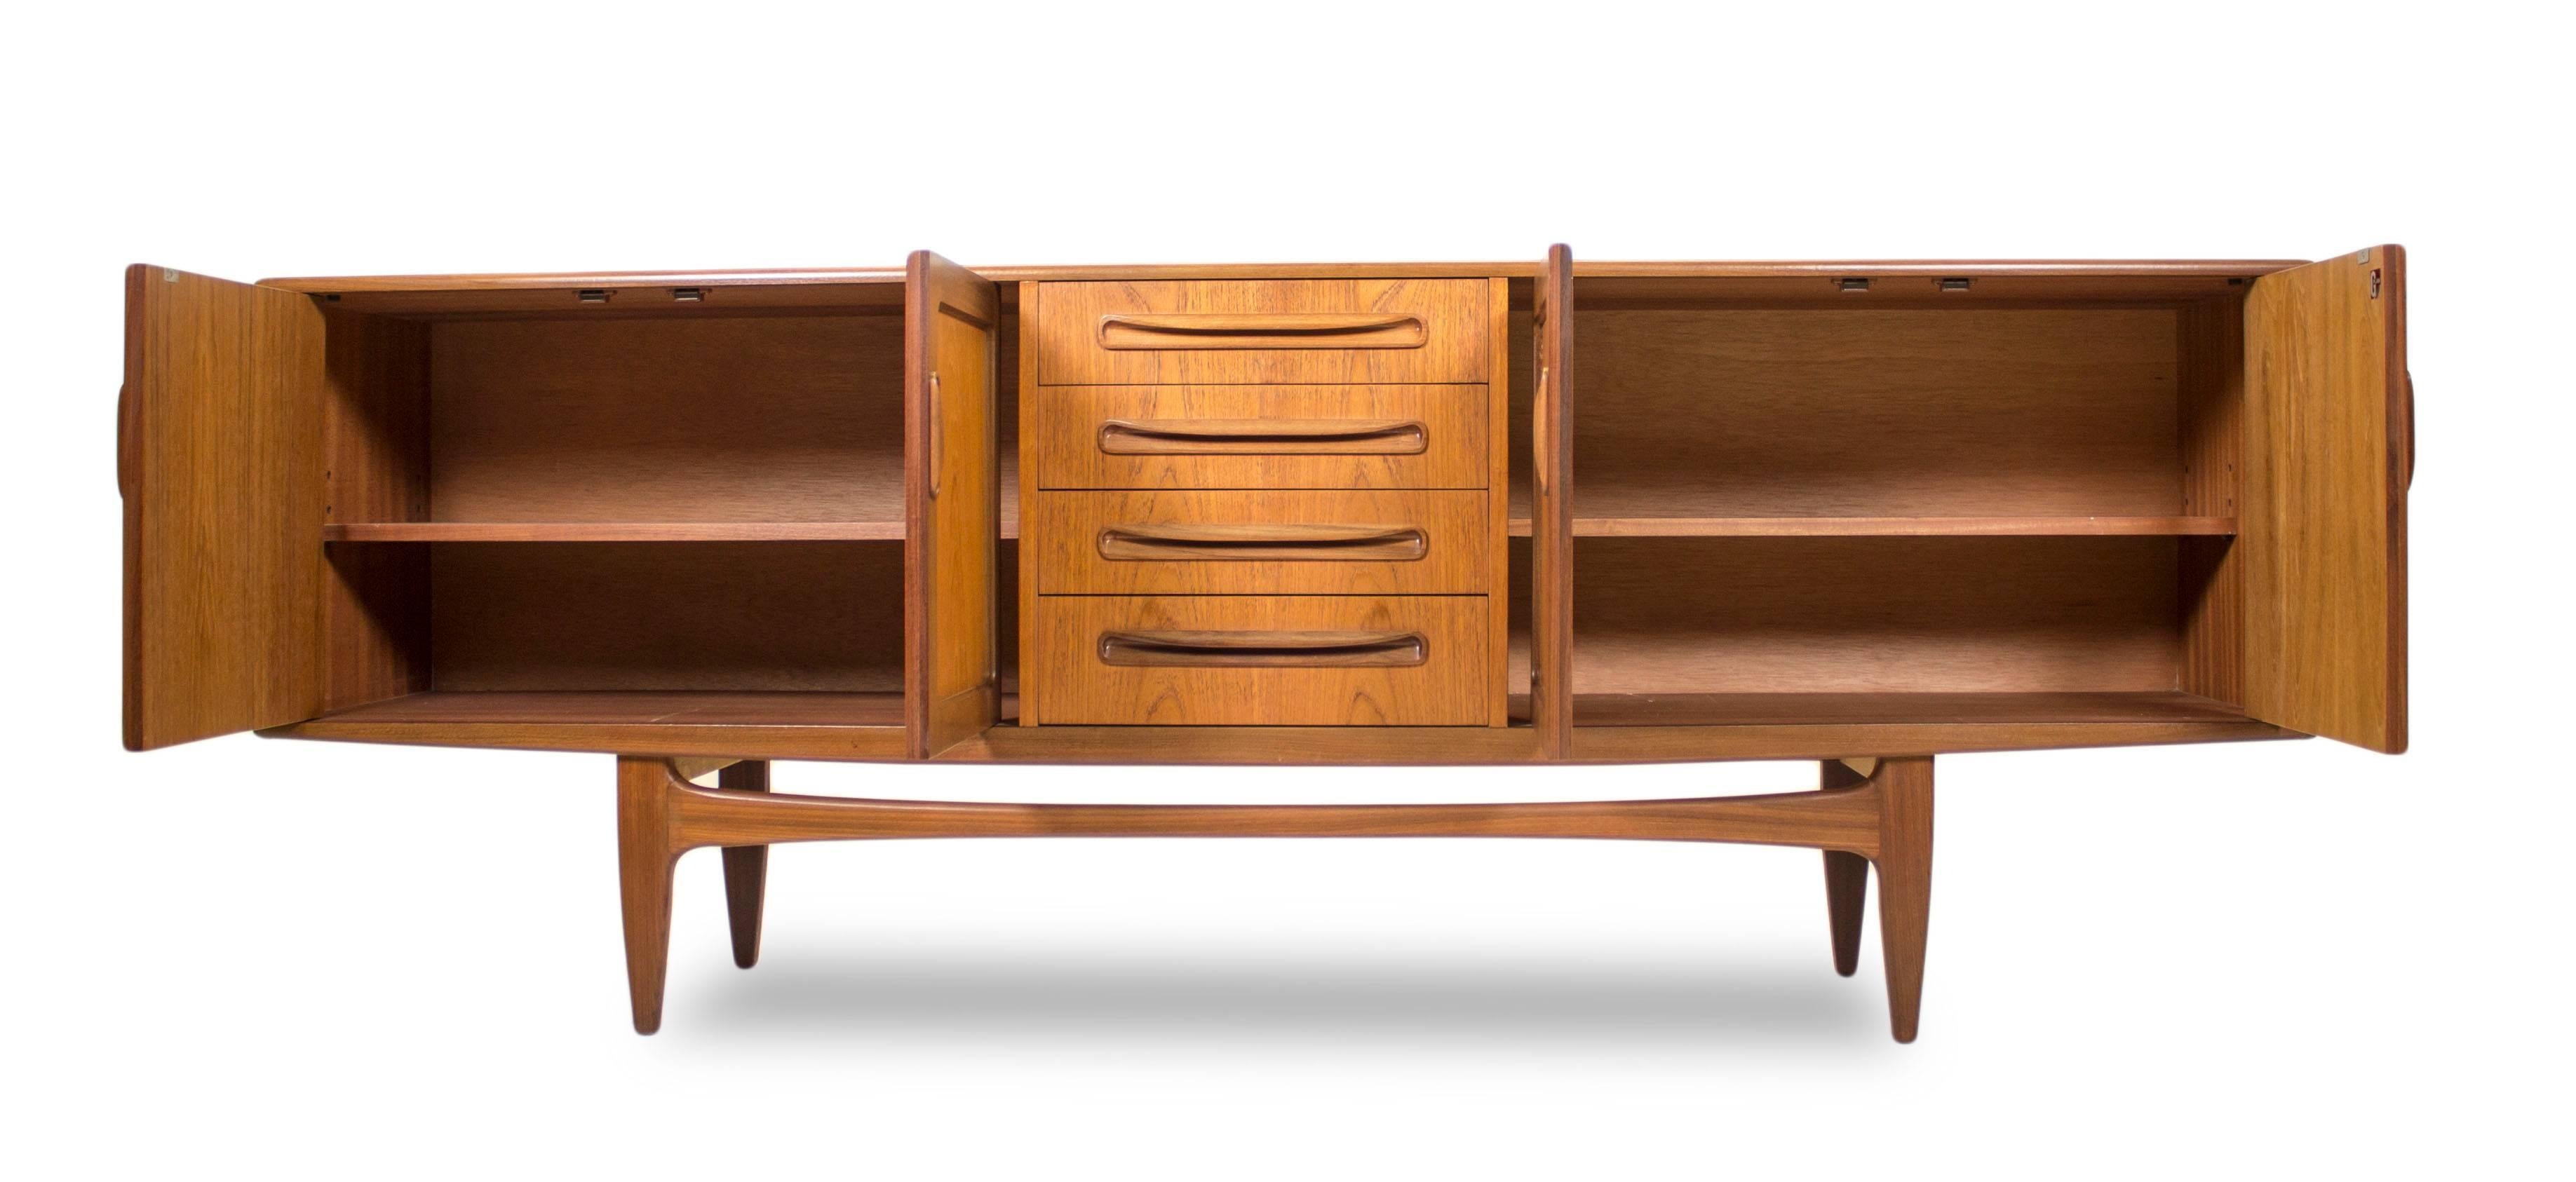 When G Plan hired V B Wilkins to design a new range, little did they realize that he would go on to produce probably the most popular and sought after range of all the British Mid-Century Designers.

Set on organic Teak legs, the unit floats